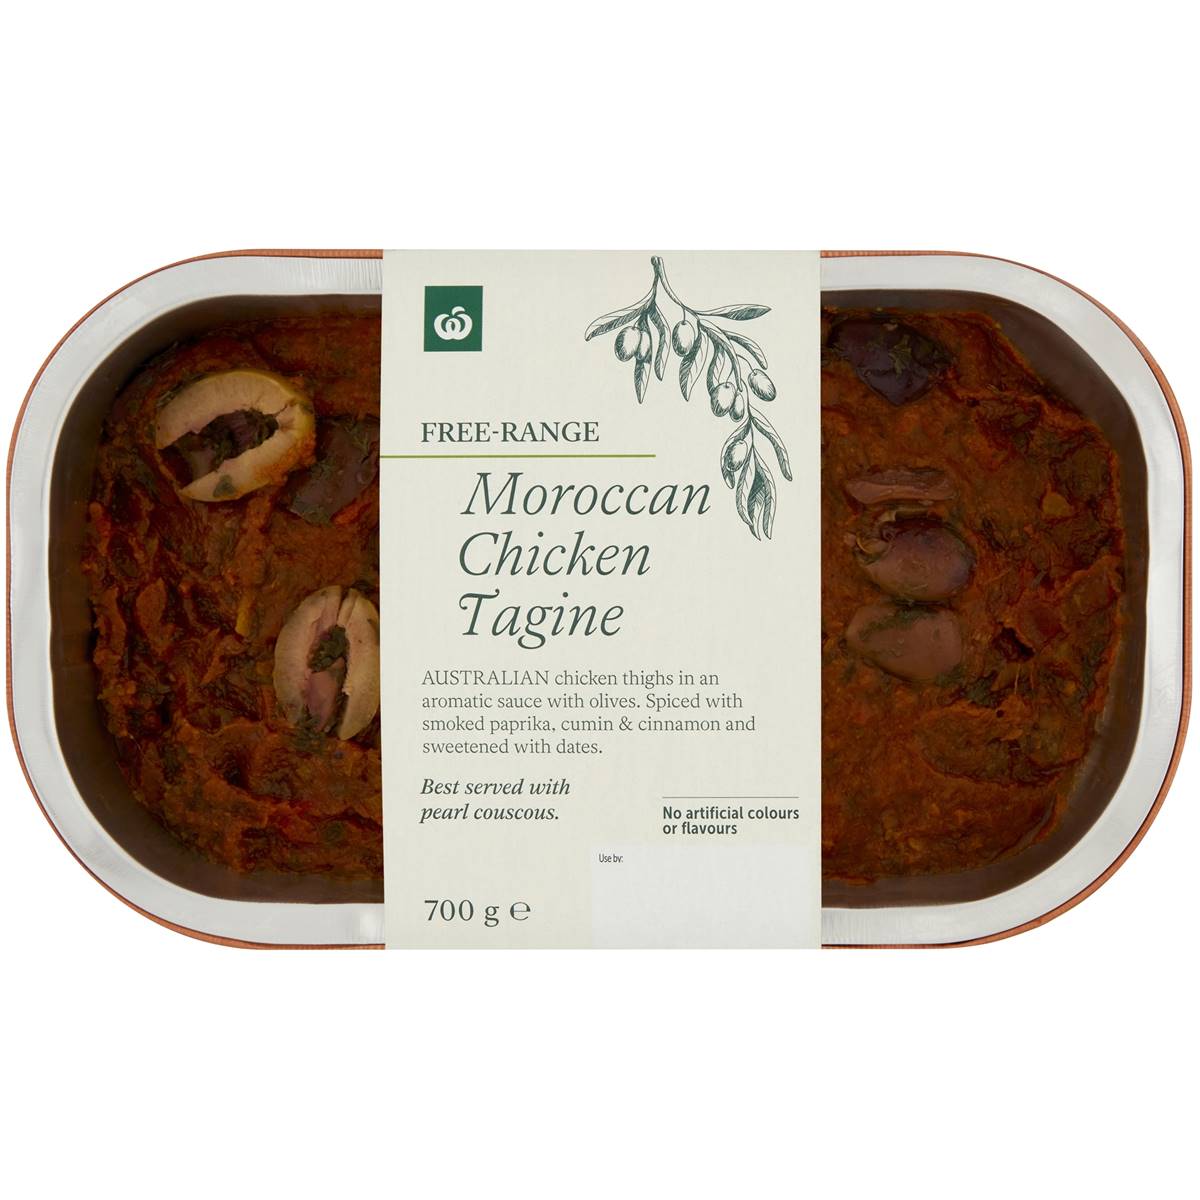 Calories in Woolworths Free Range Moroccan Chicken Tagine